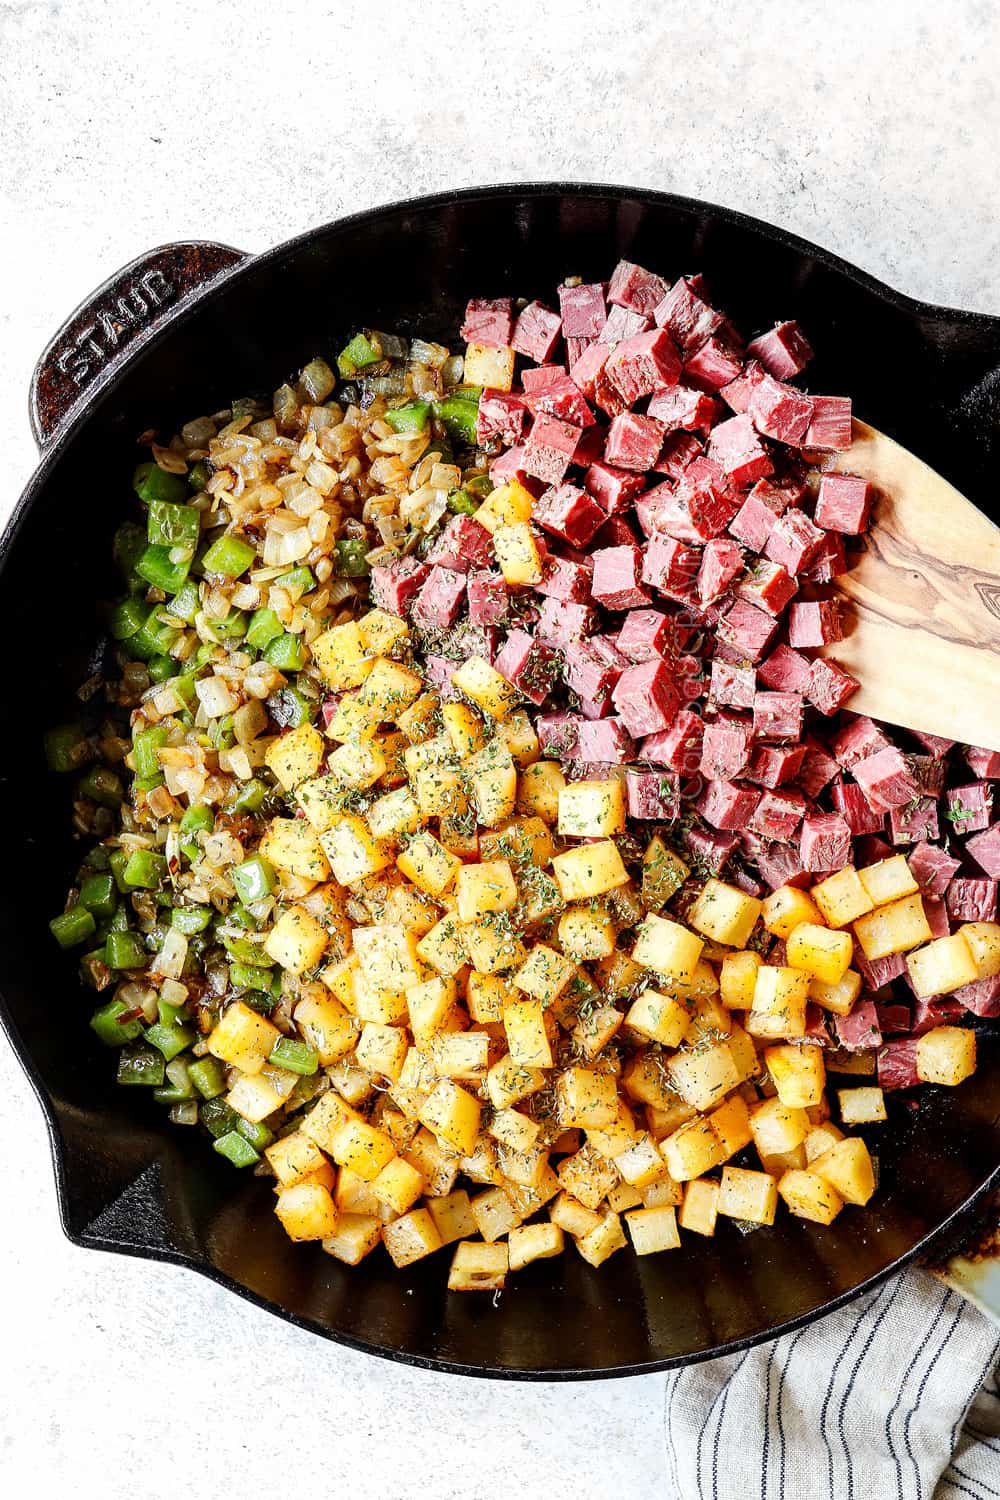 showing how to make corned beef hash by adding corned beef, diced potatoes and onions to a skillet